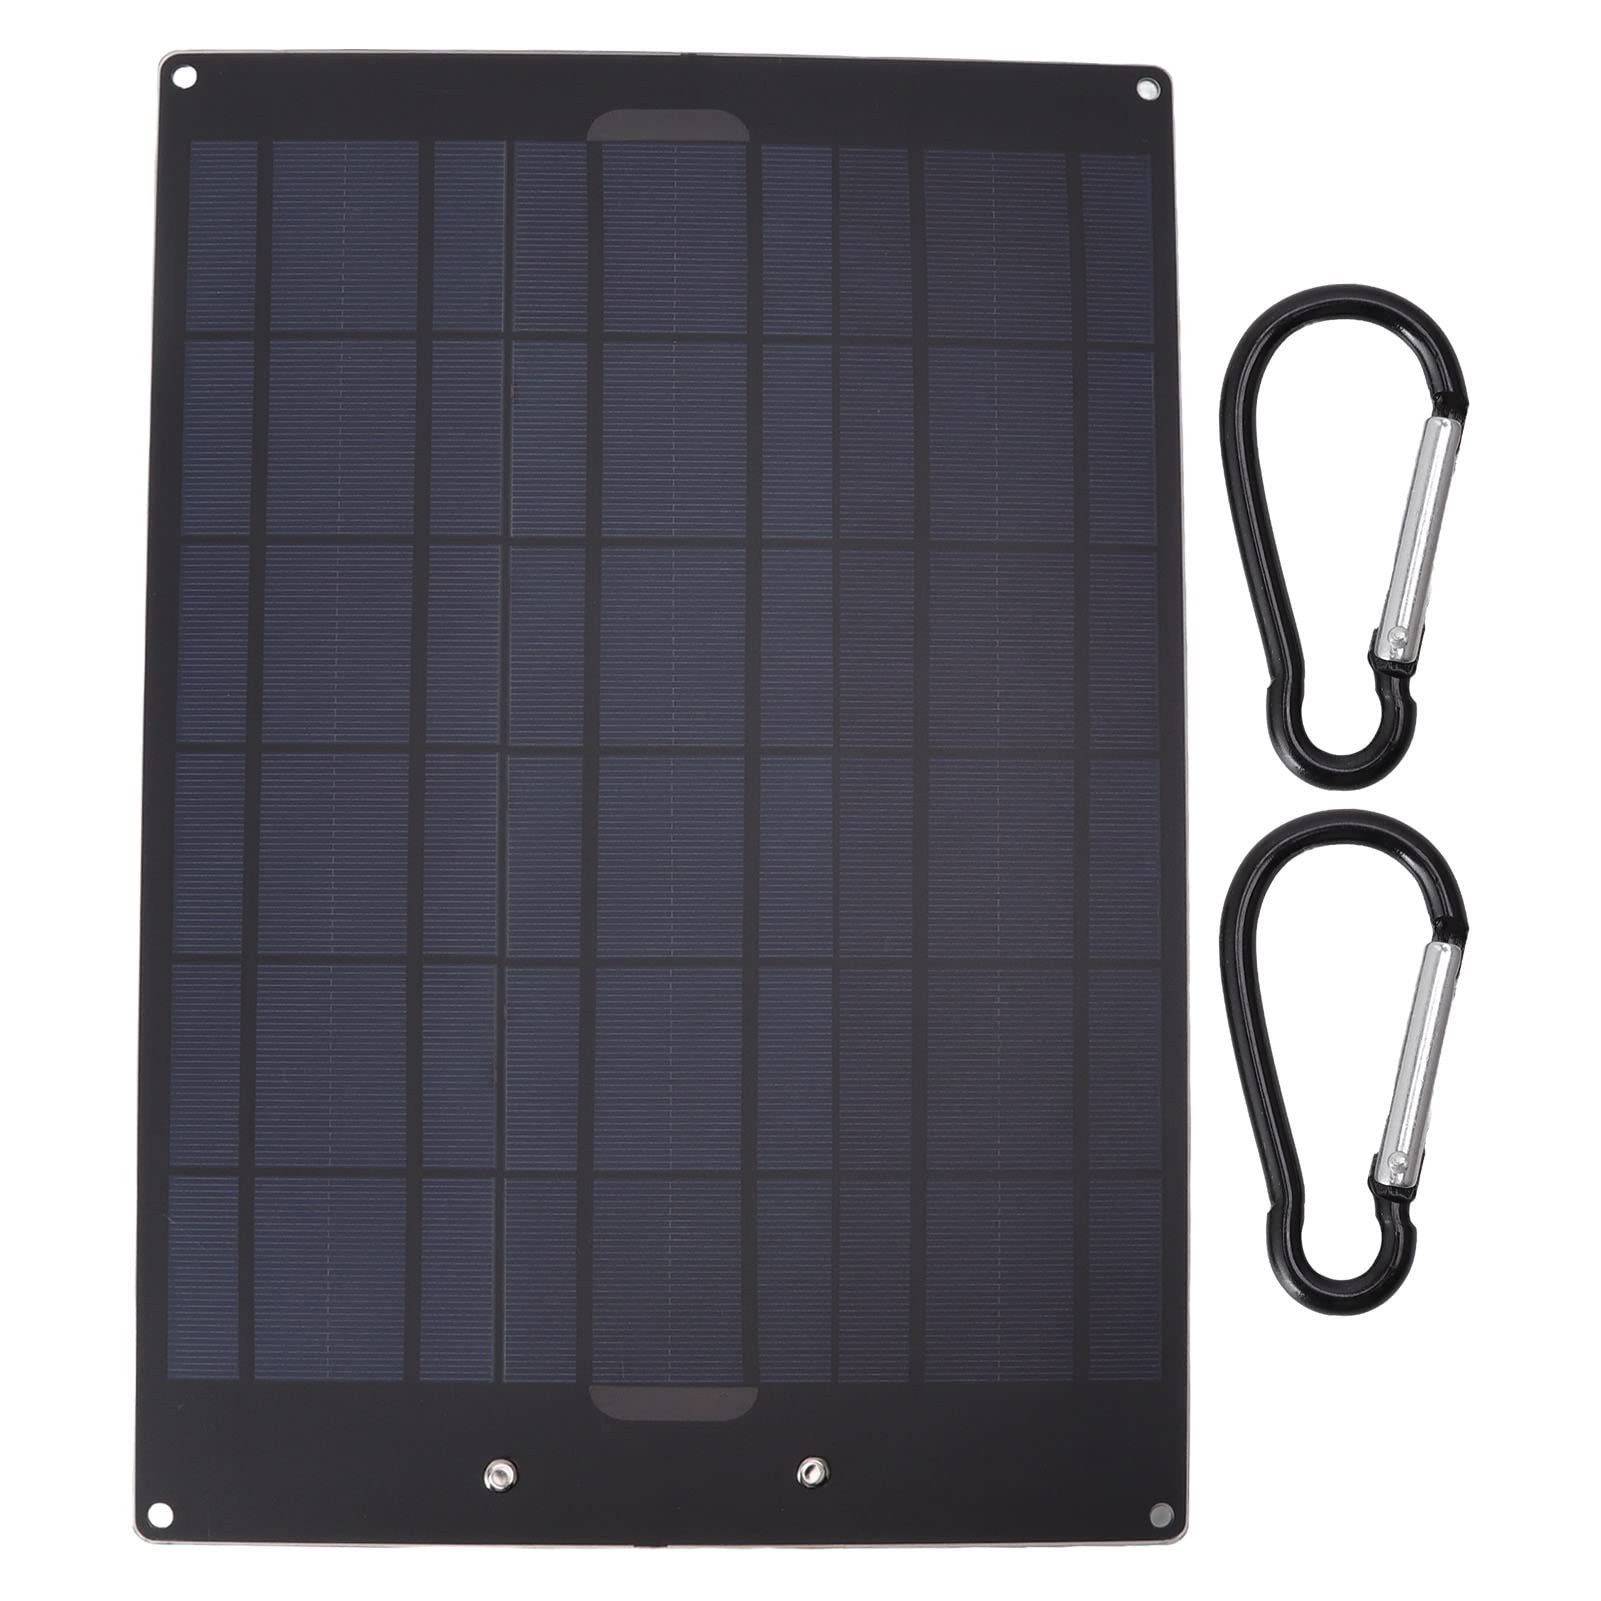 Solar Panel Monocrystalline Silicon 50W Portable High Conversion Efficiency Solar Panel Battery Charger for Outdoor Camping Travel